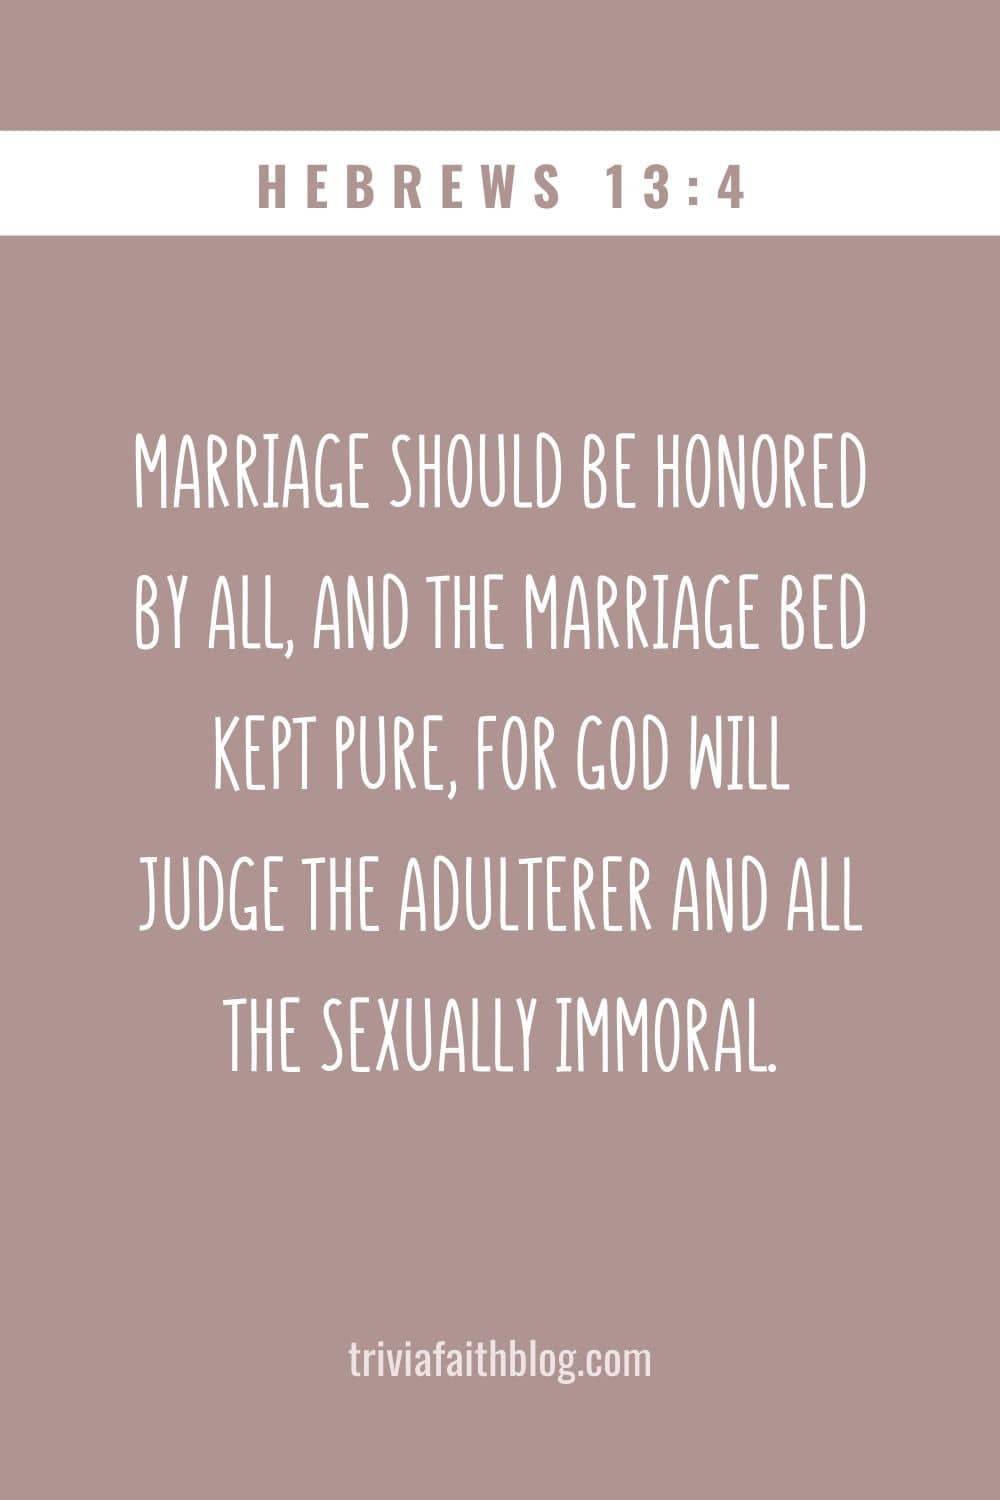 Marriage should be honored by all, and the marriage bed kept pure, for God will judge the adulterer and all the sexually immoral